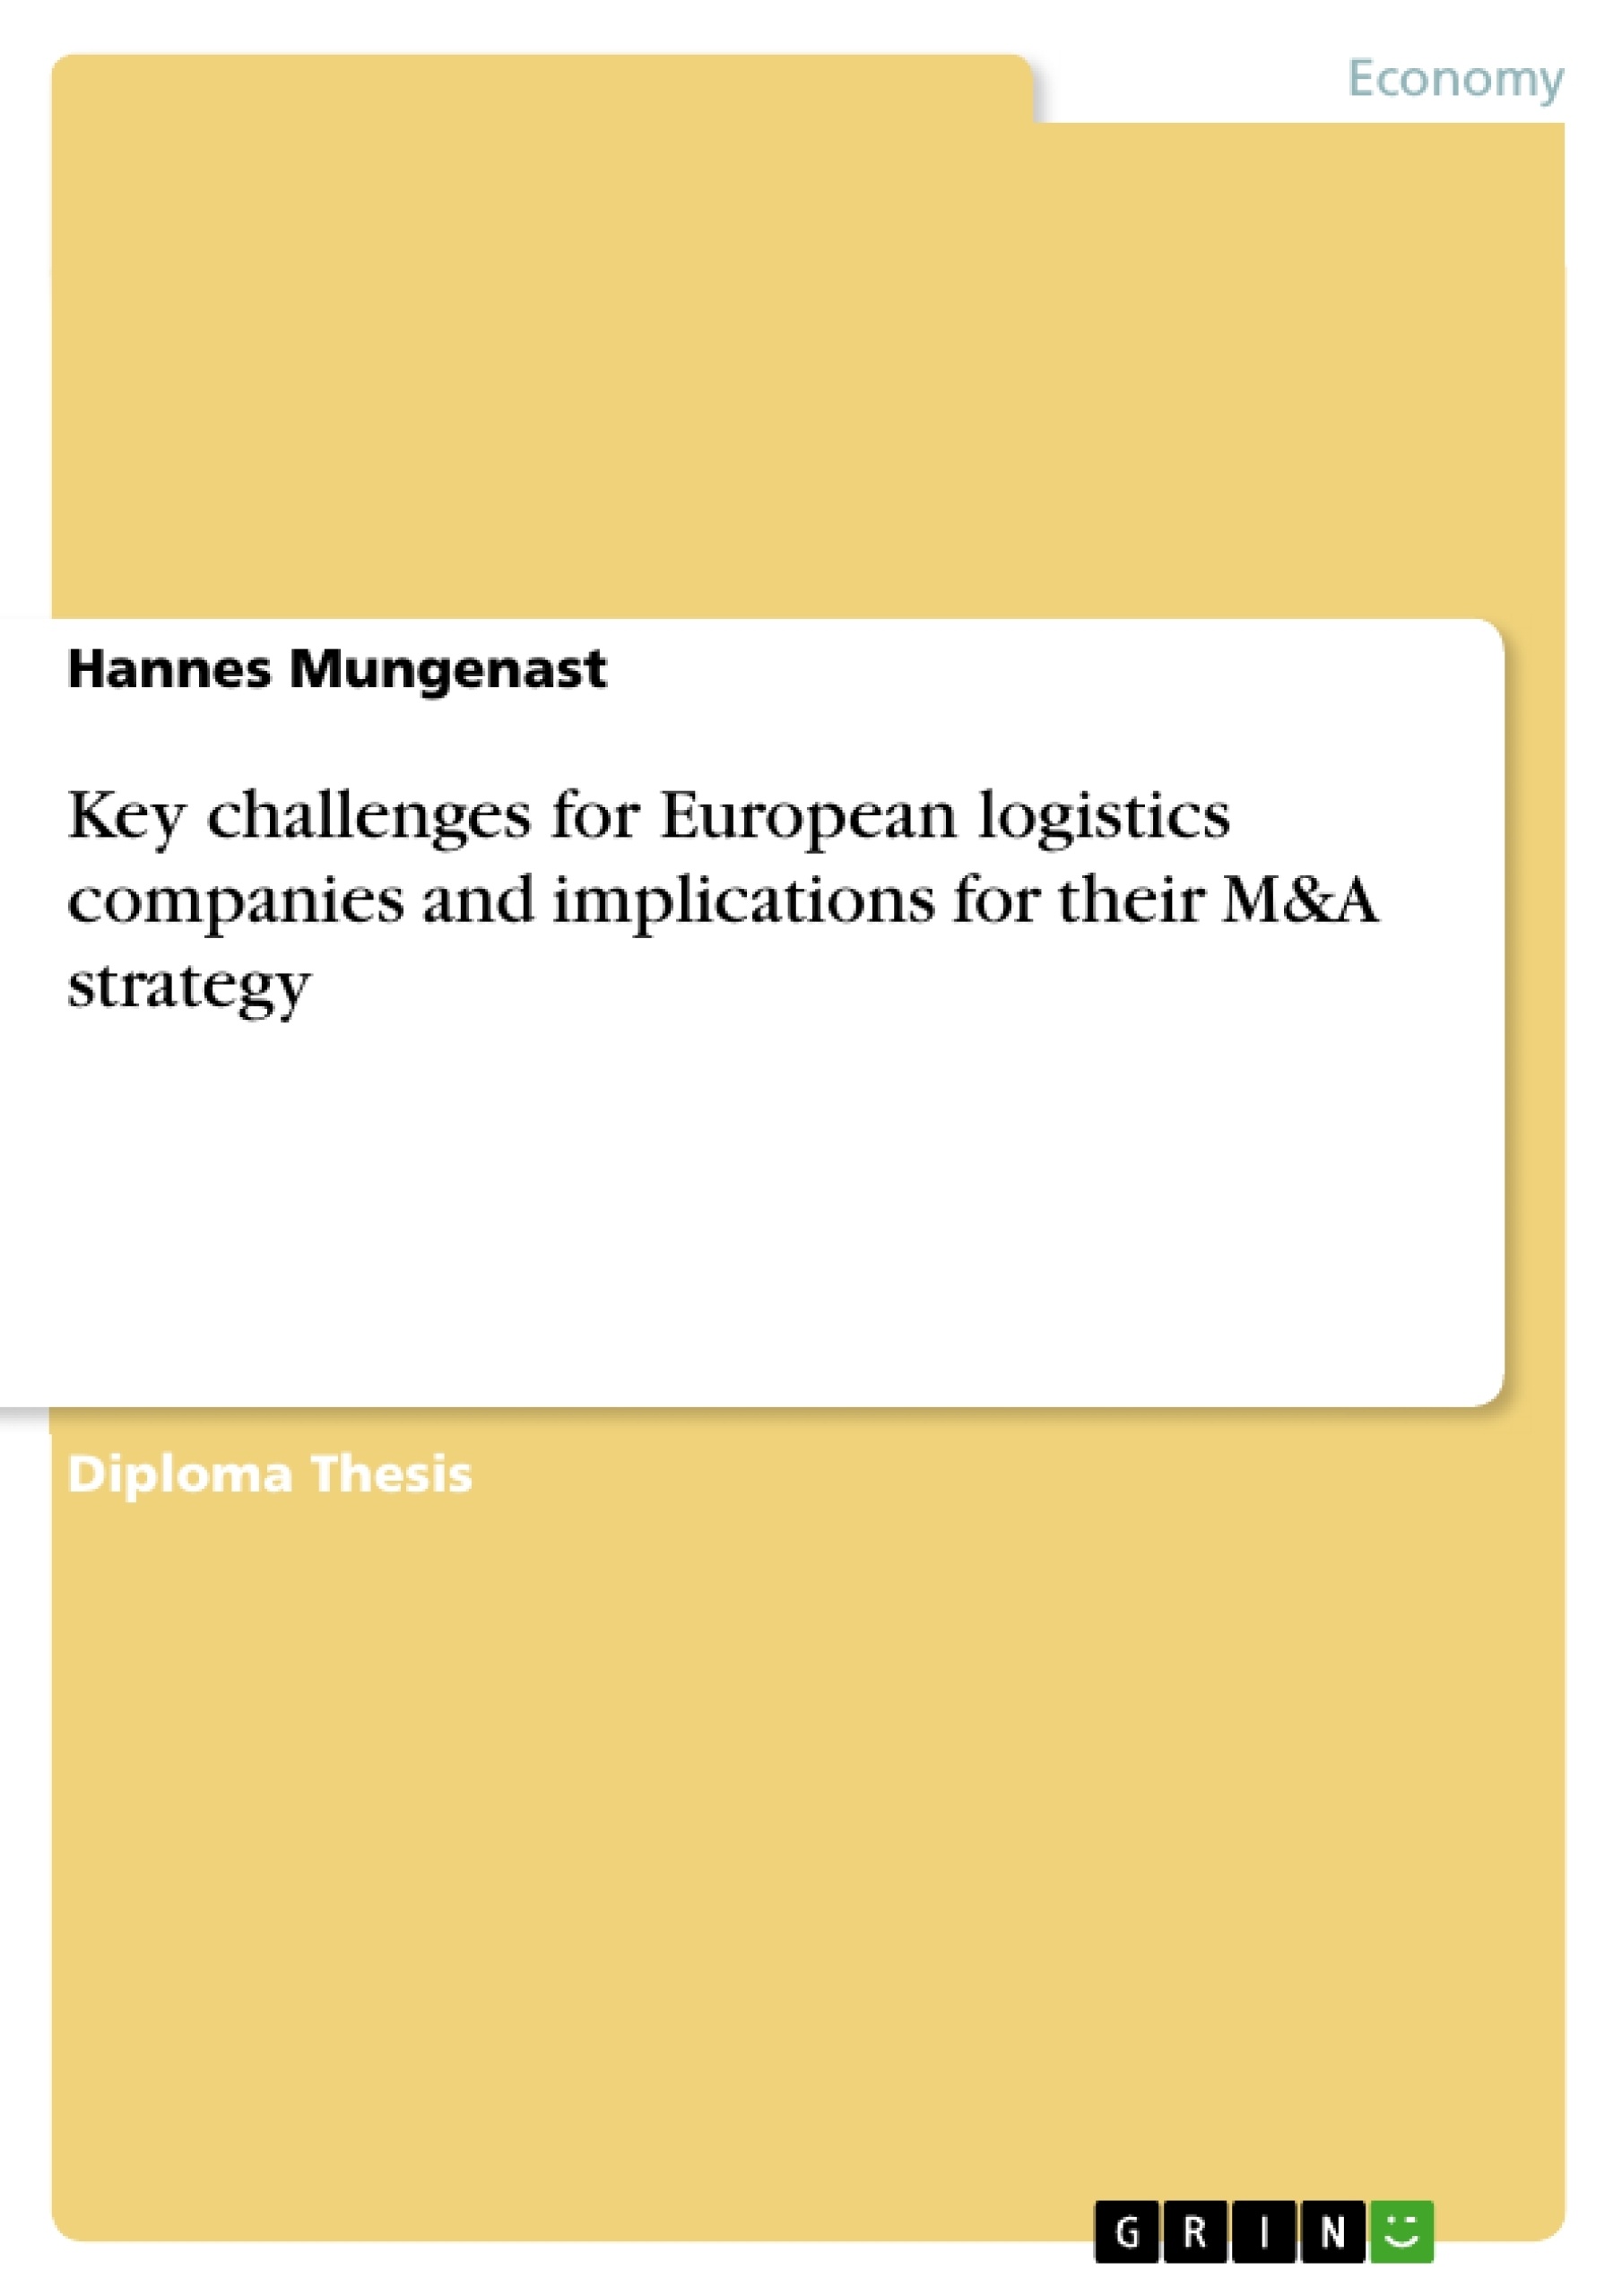 Title: Key challenges for European logistics companies and implications for their M&A strategy